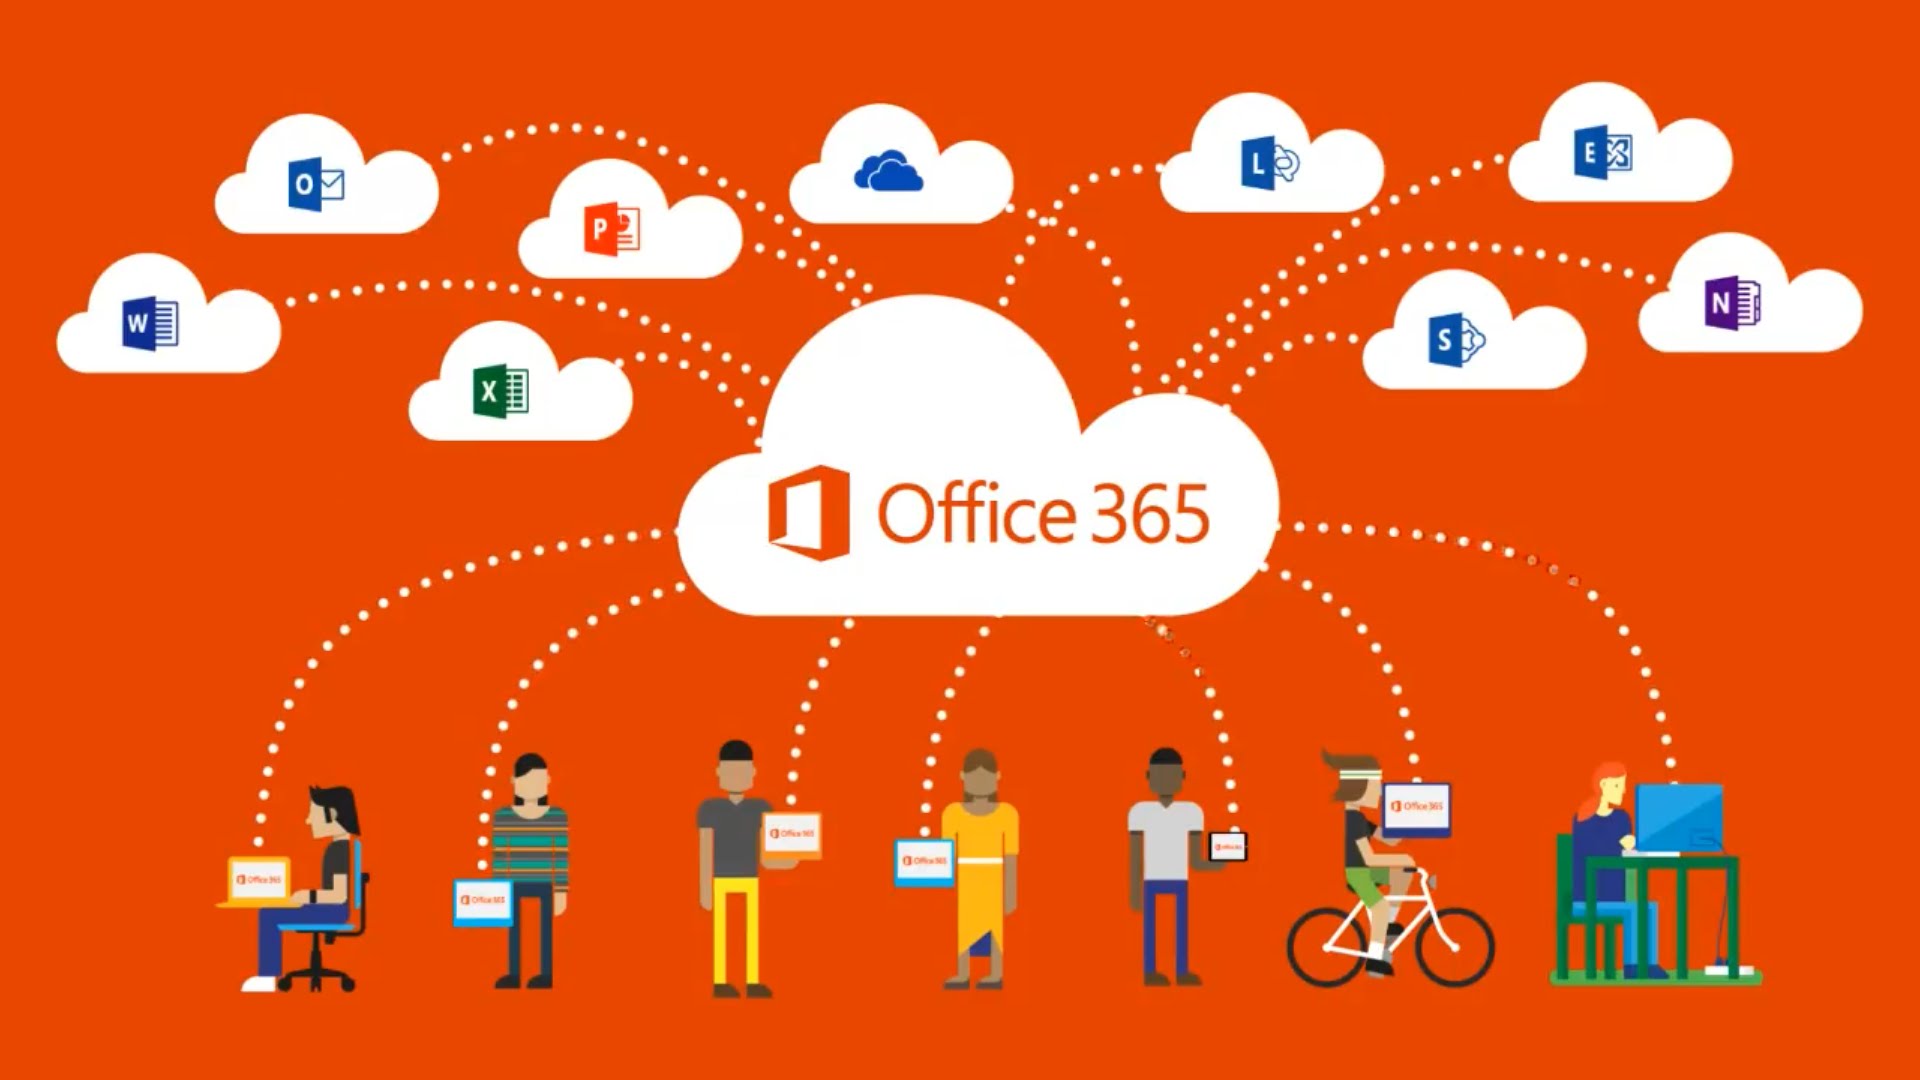 Microsoft Office 365 for your business